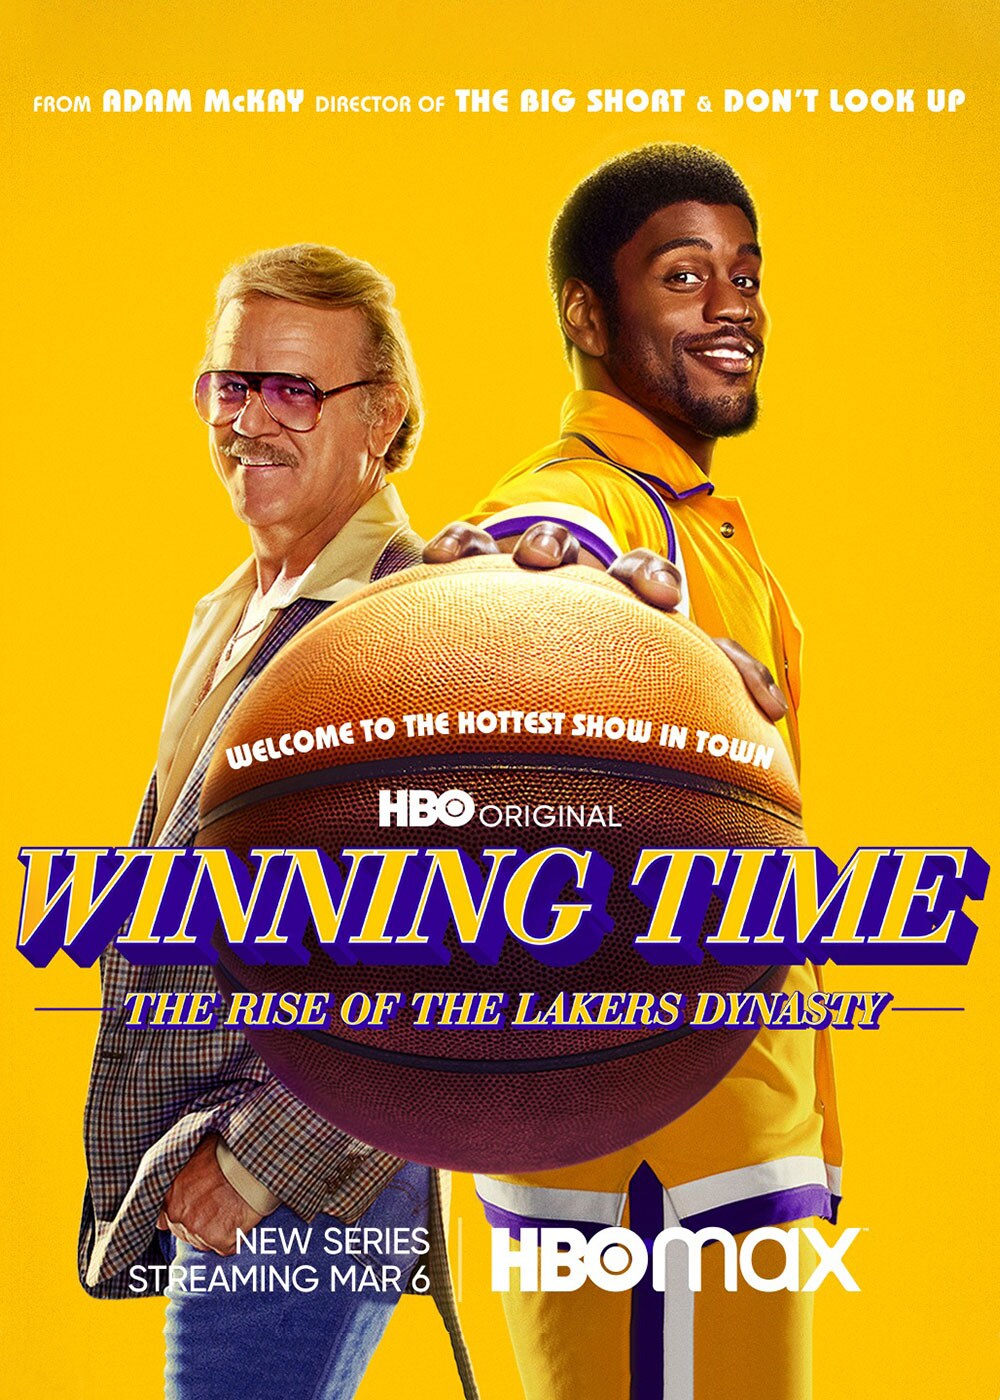 LA Lakers 1980s dynasty to feature in 10-part TV series, Winning Time: Rise  of the Lakers Dynasty, trailer, HBO, NBA news